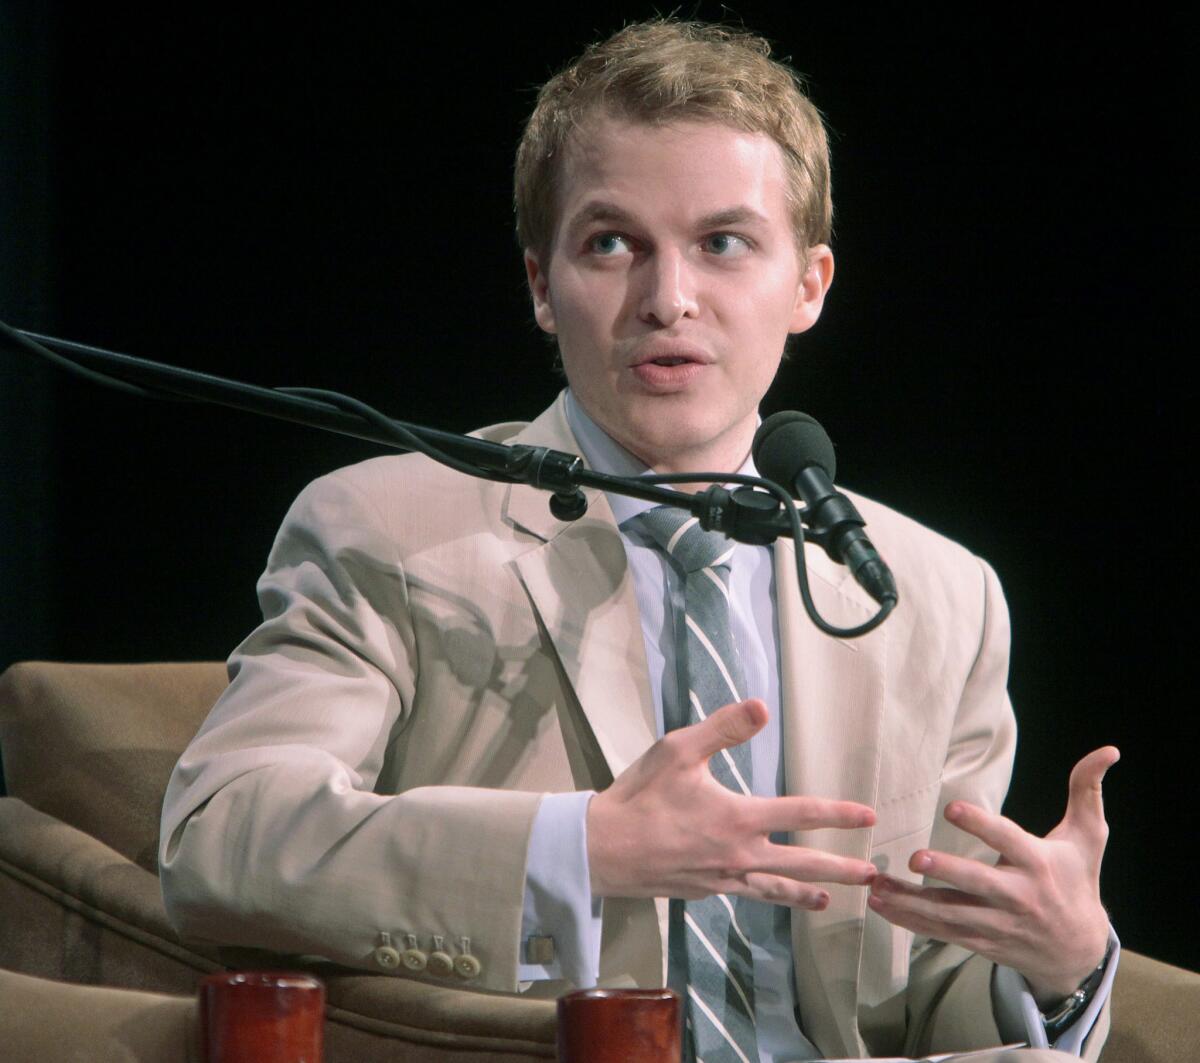 Ronan Farrow's new book is “Catch and Kill: Lies, Spies, and a Conspiracy to Protect Predators.”